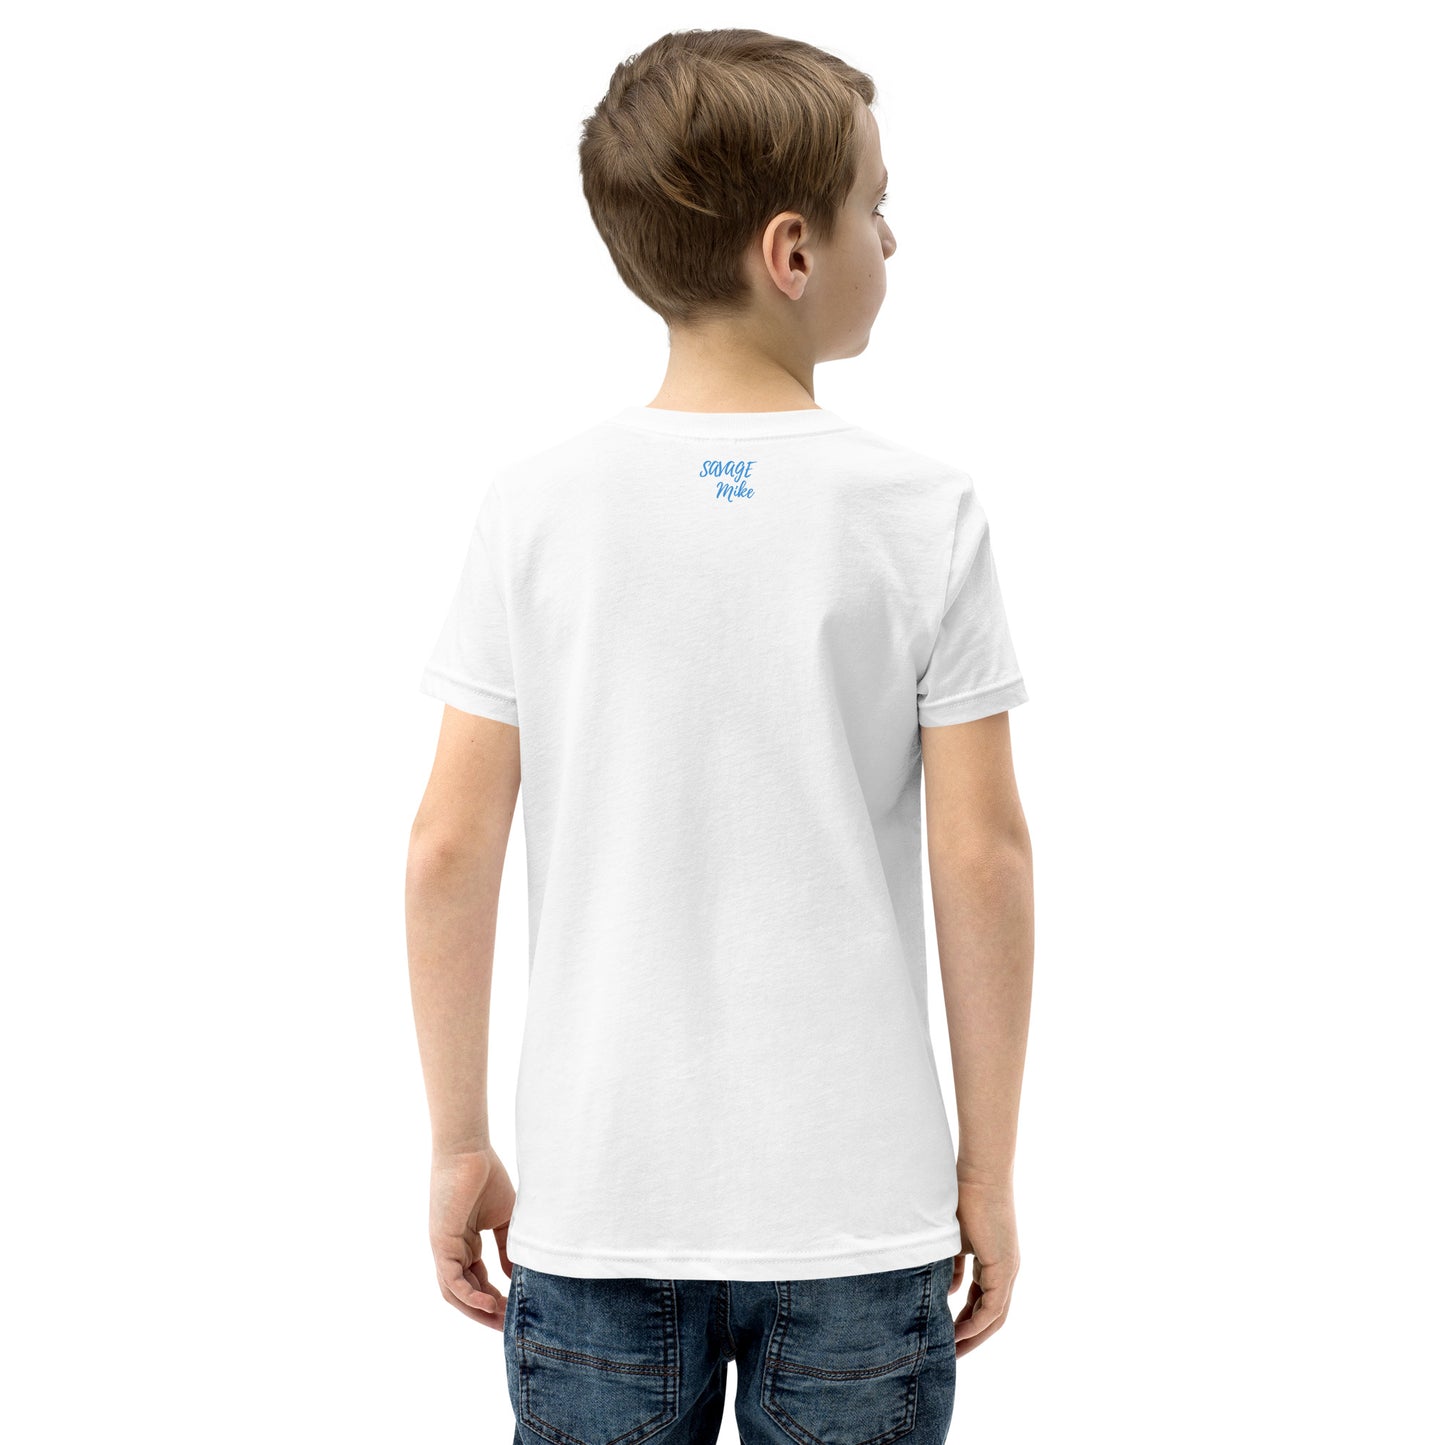 Later Youth Short Sleeve T-Shirt